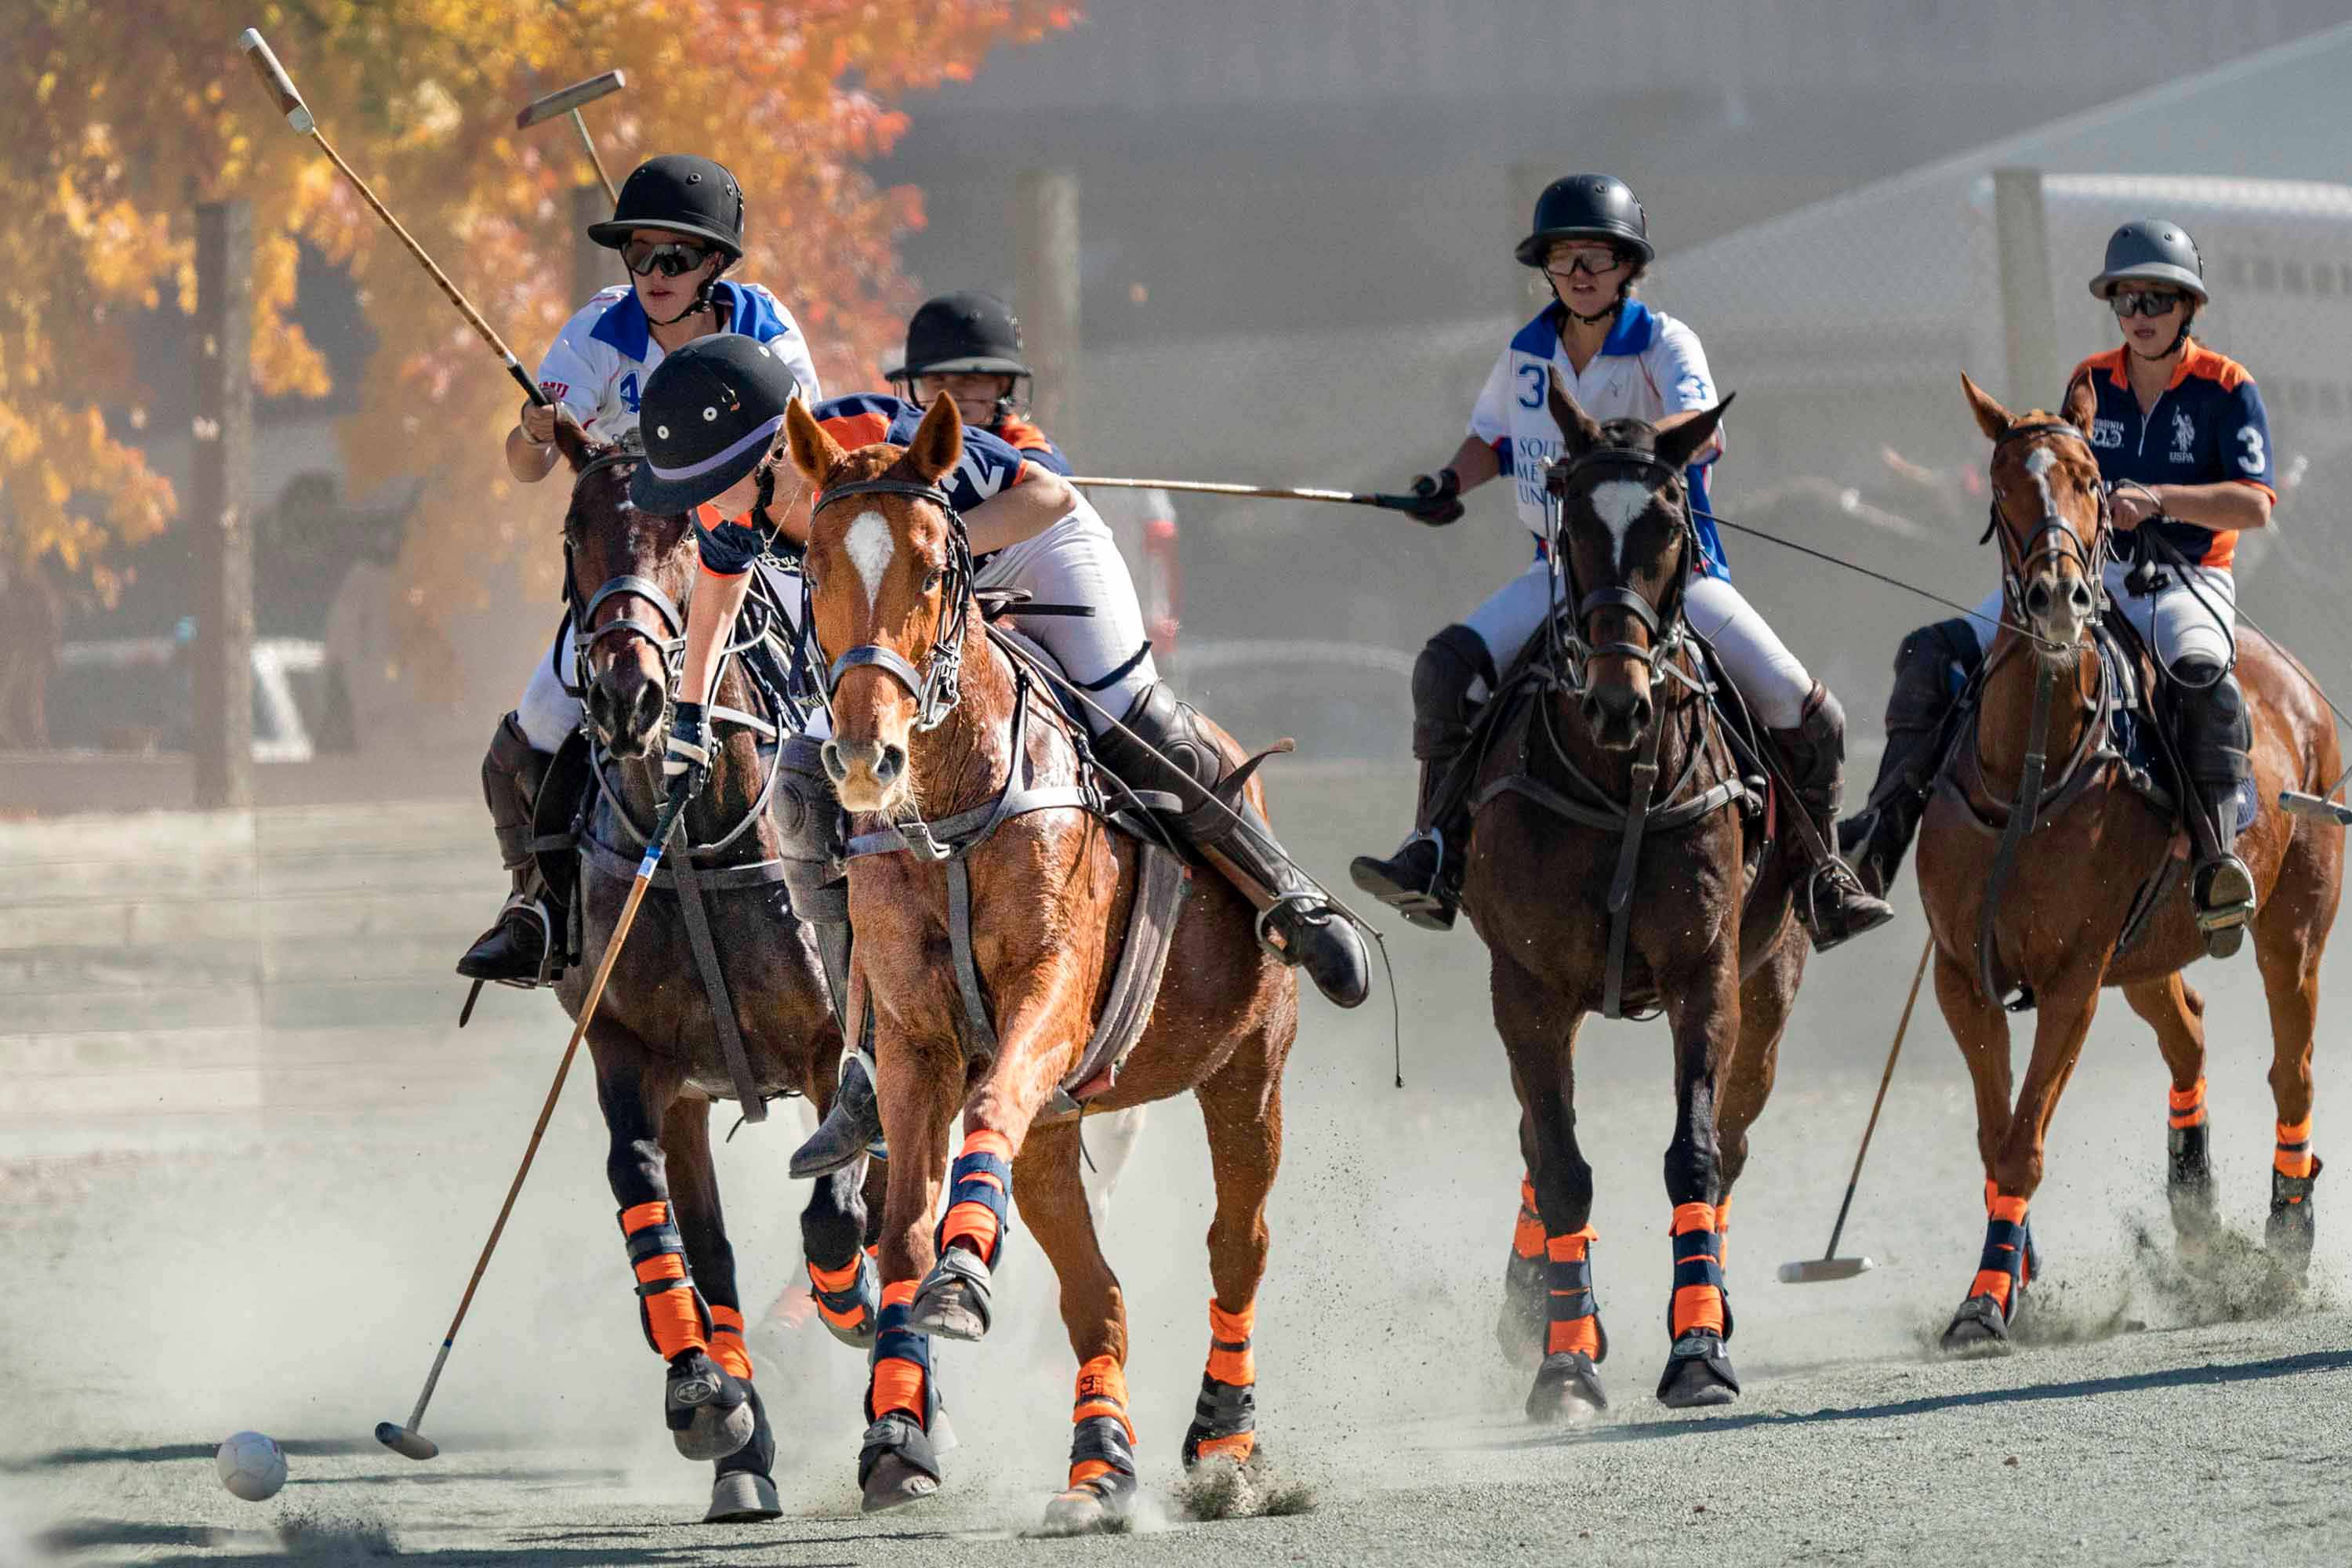 UVA polo players going after a ball against their opponents